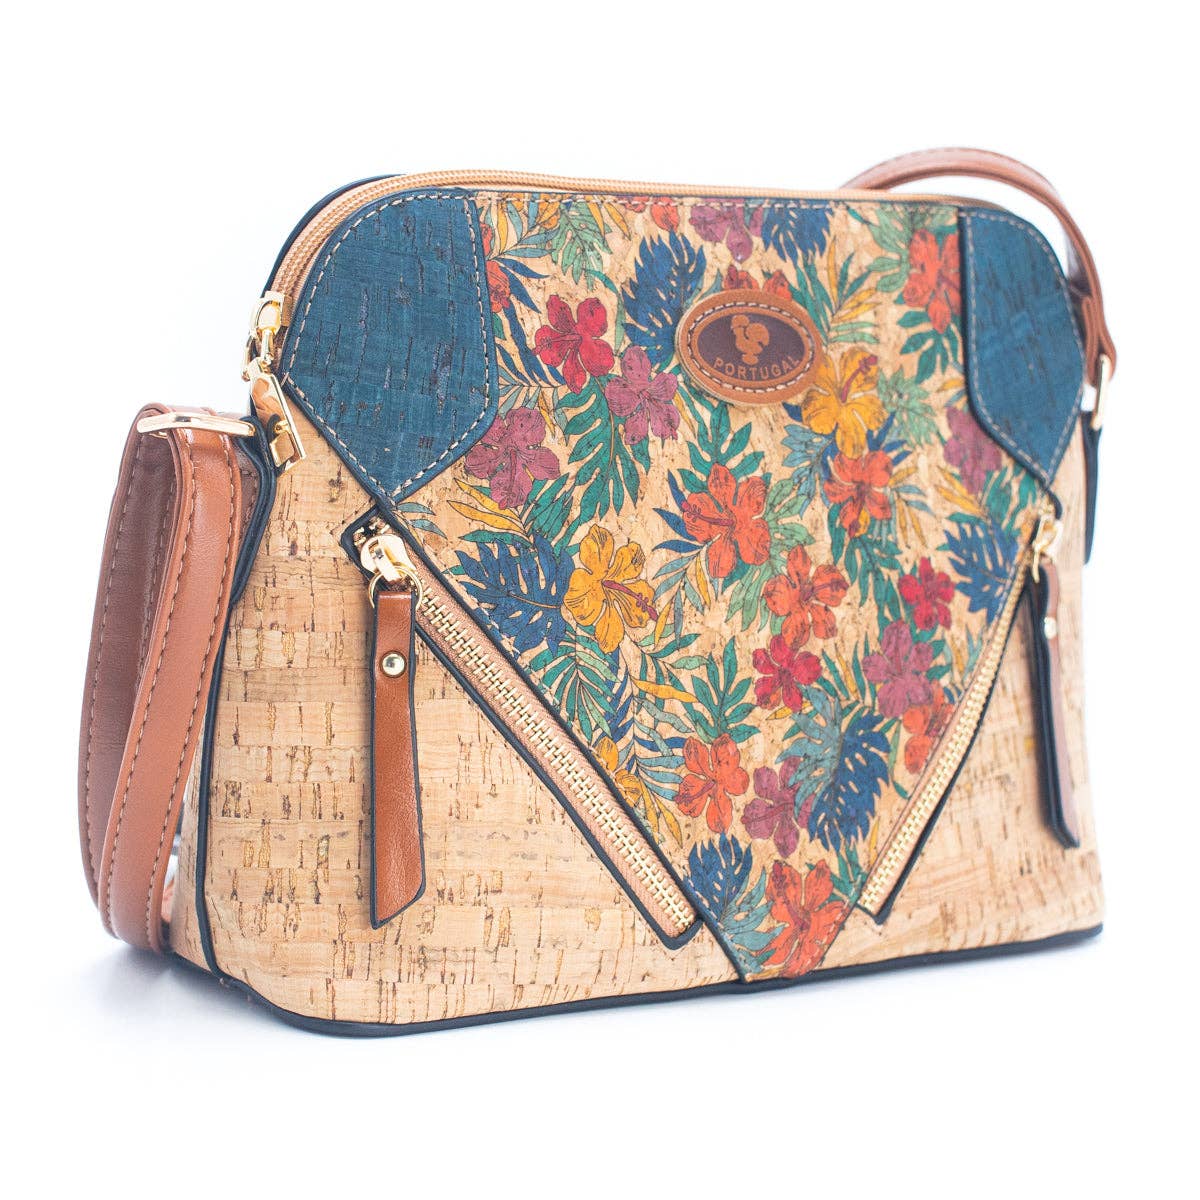 Cork Lady's Crossbody Bag w/ Stylish Floral Print & Diagonal Zipper Accents | THE CORK COLLECTION